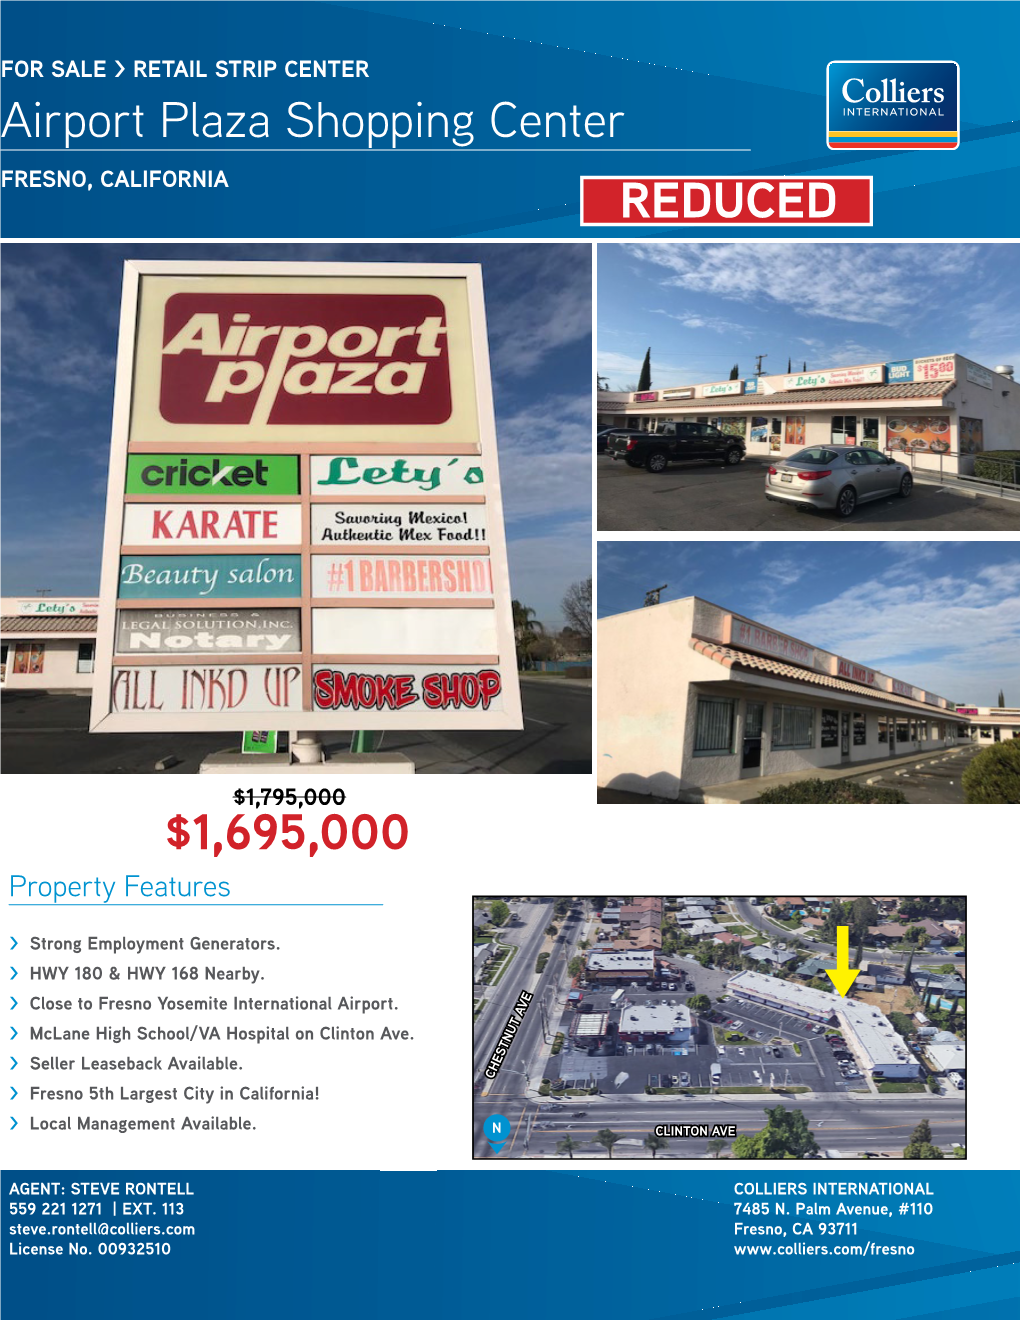 Airport Plaza Shopping Center REDUCED $1695000